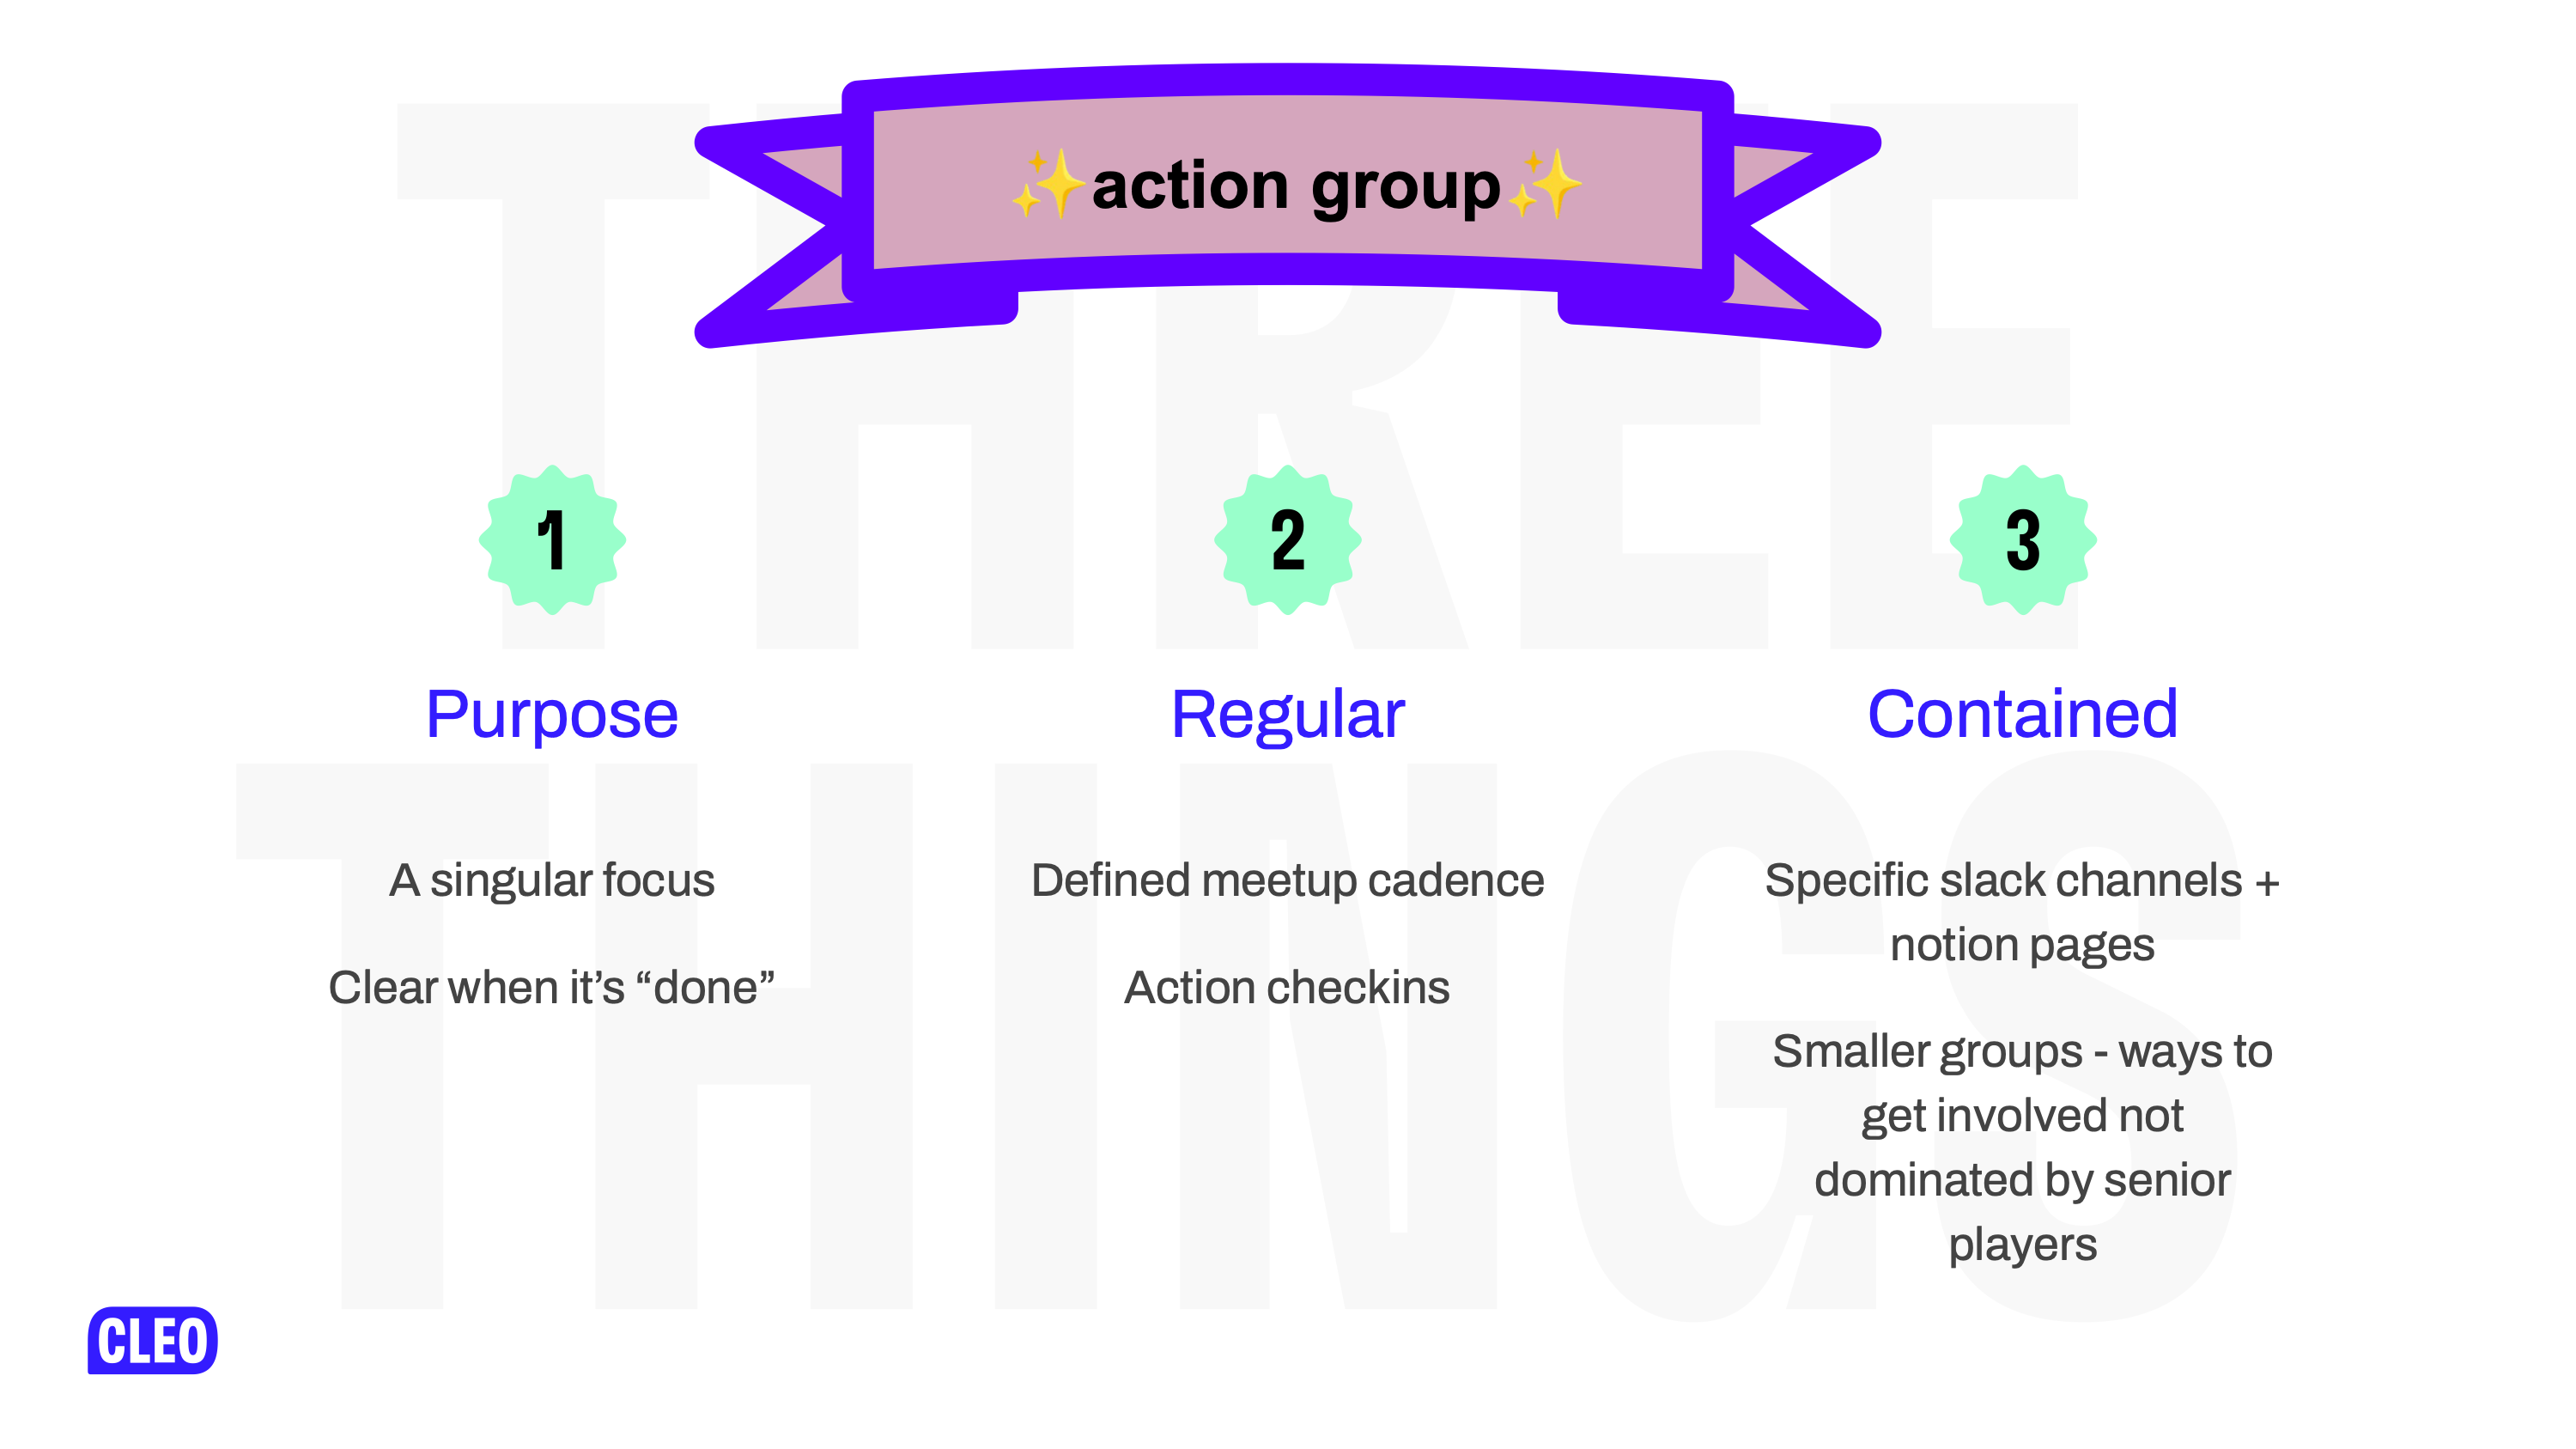 3 points explaining what an action group is, 1: has a purpose, 2: is regular, 3: is contained, text: action group, 1: Purpose, A singular focus, 2: Regular, Defined meetup cadence, action checkins, 3: Contained, Specific slack channels + notion pages, Smaller groups - ways to get involved not dominated by senior players